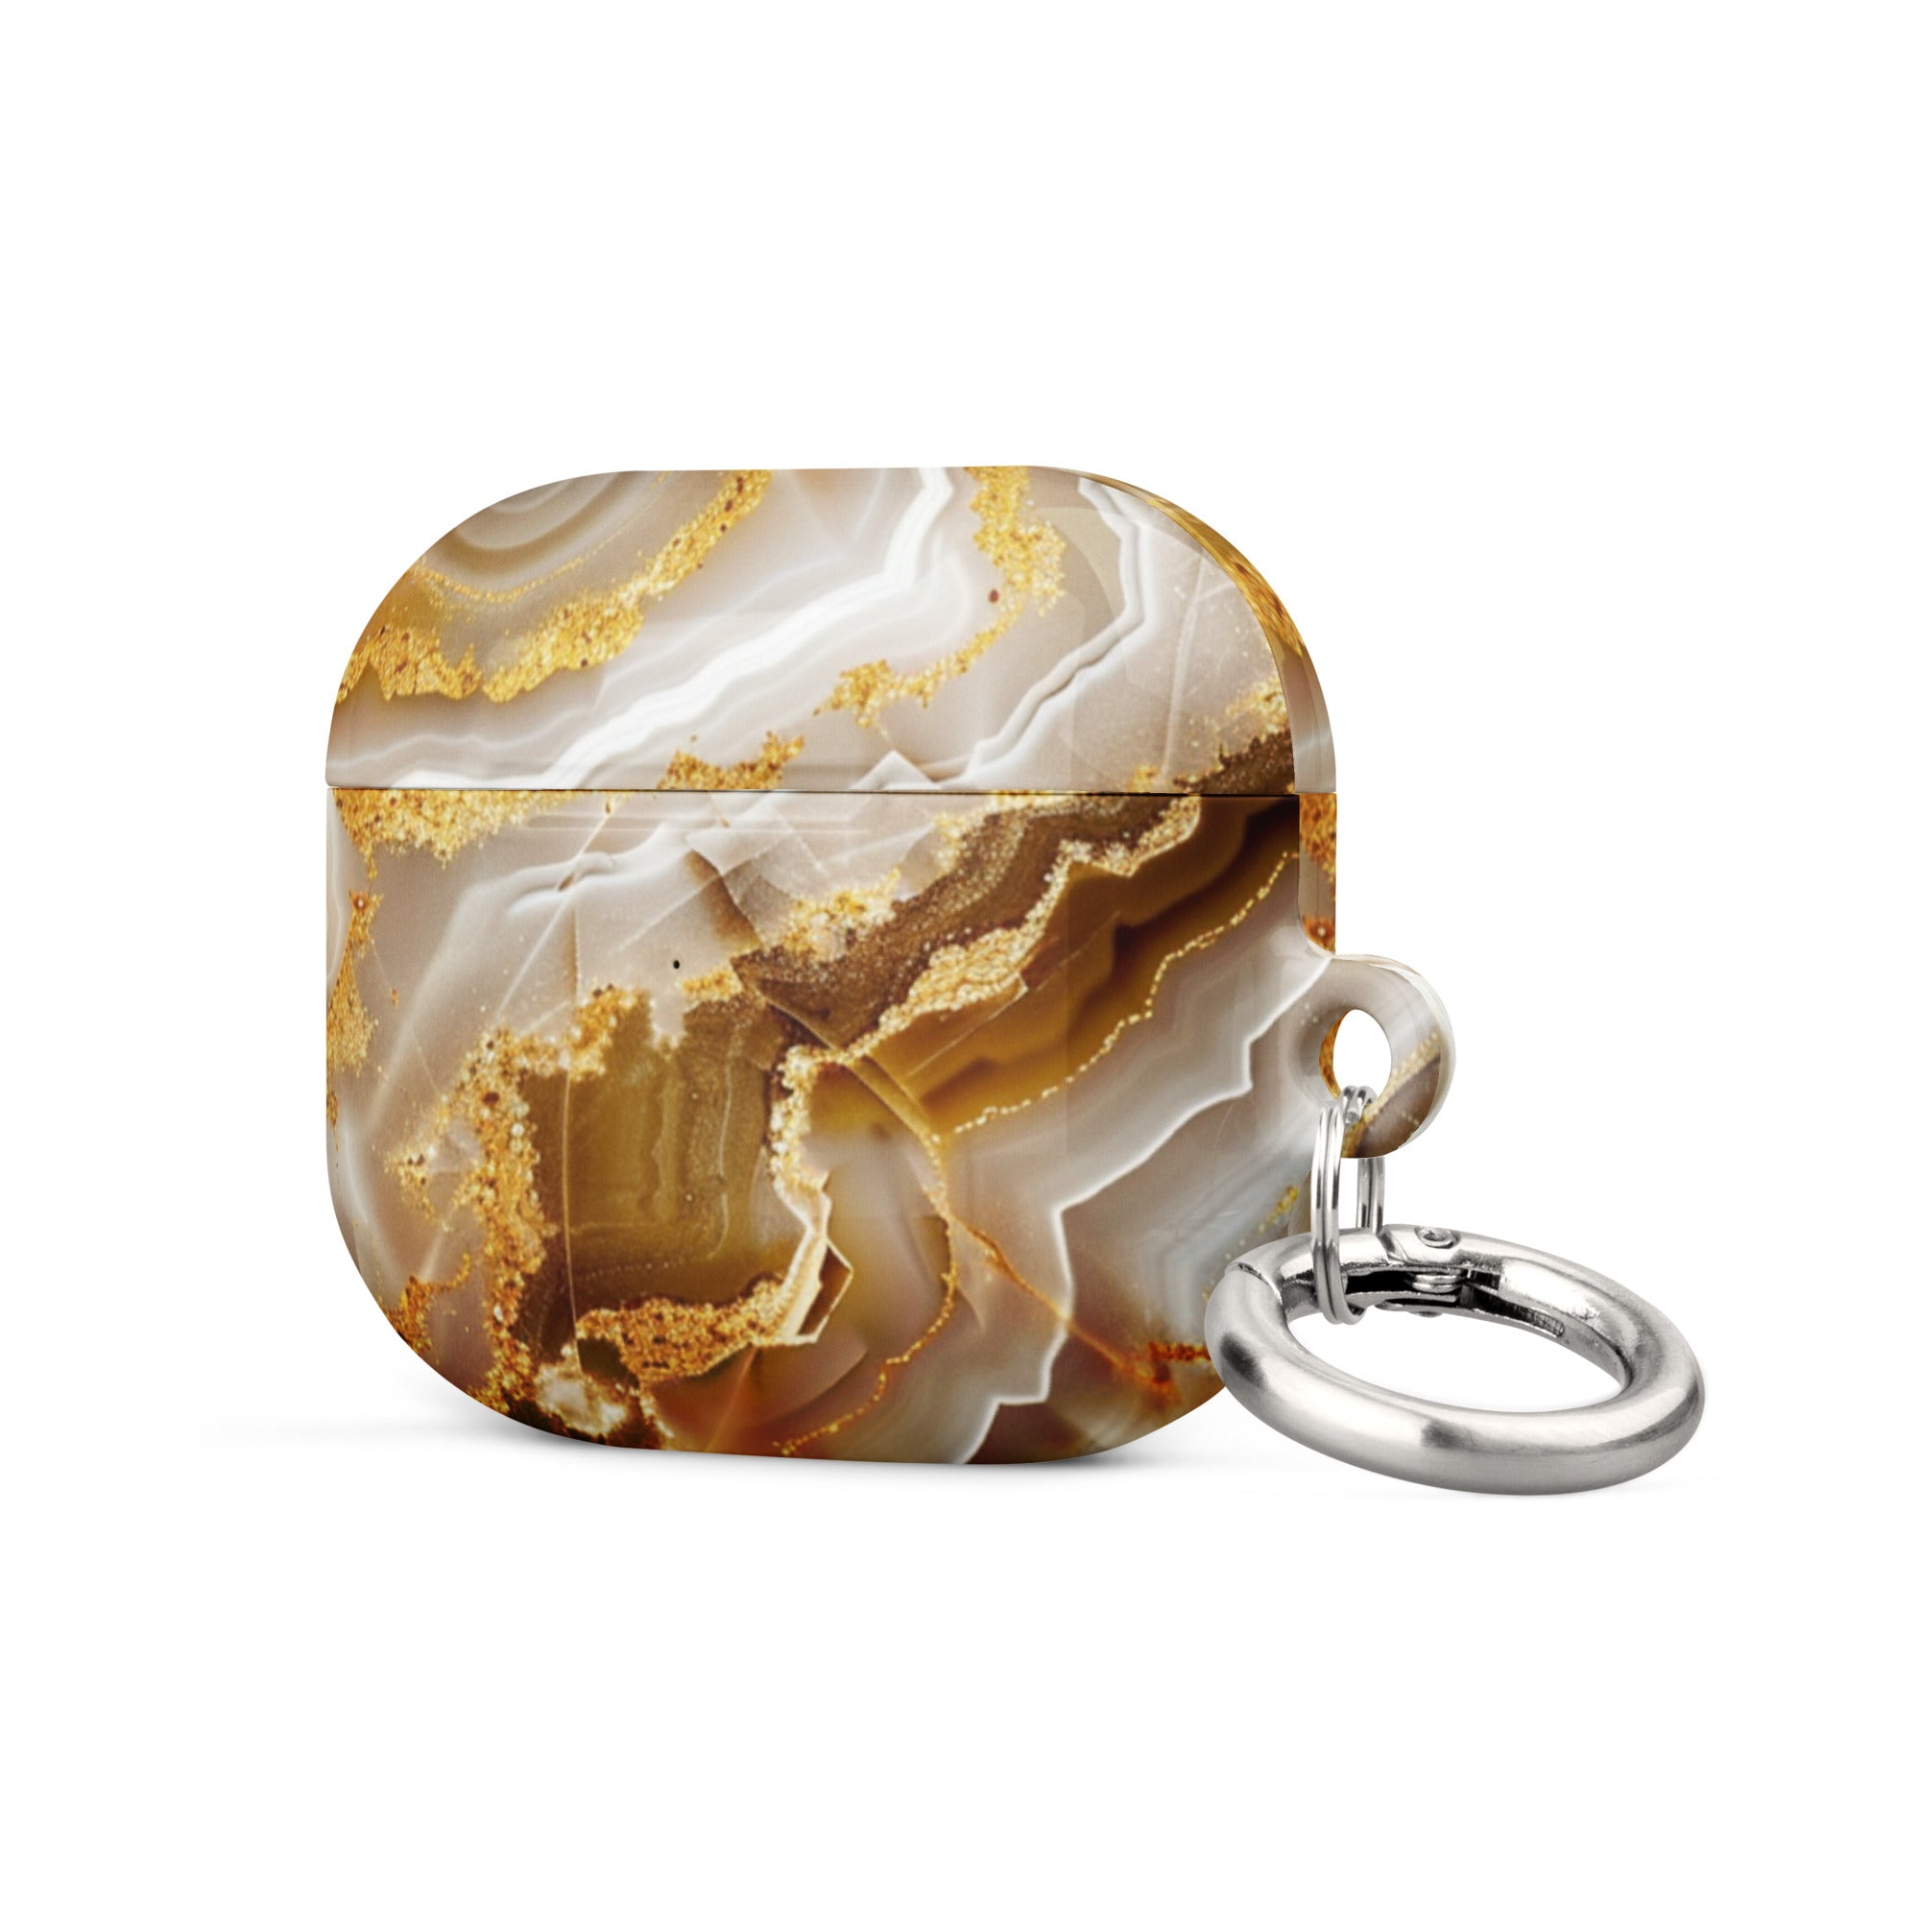 Agate Case for AirPods, Goodies N Stuff